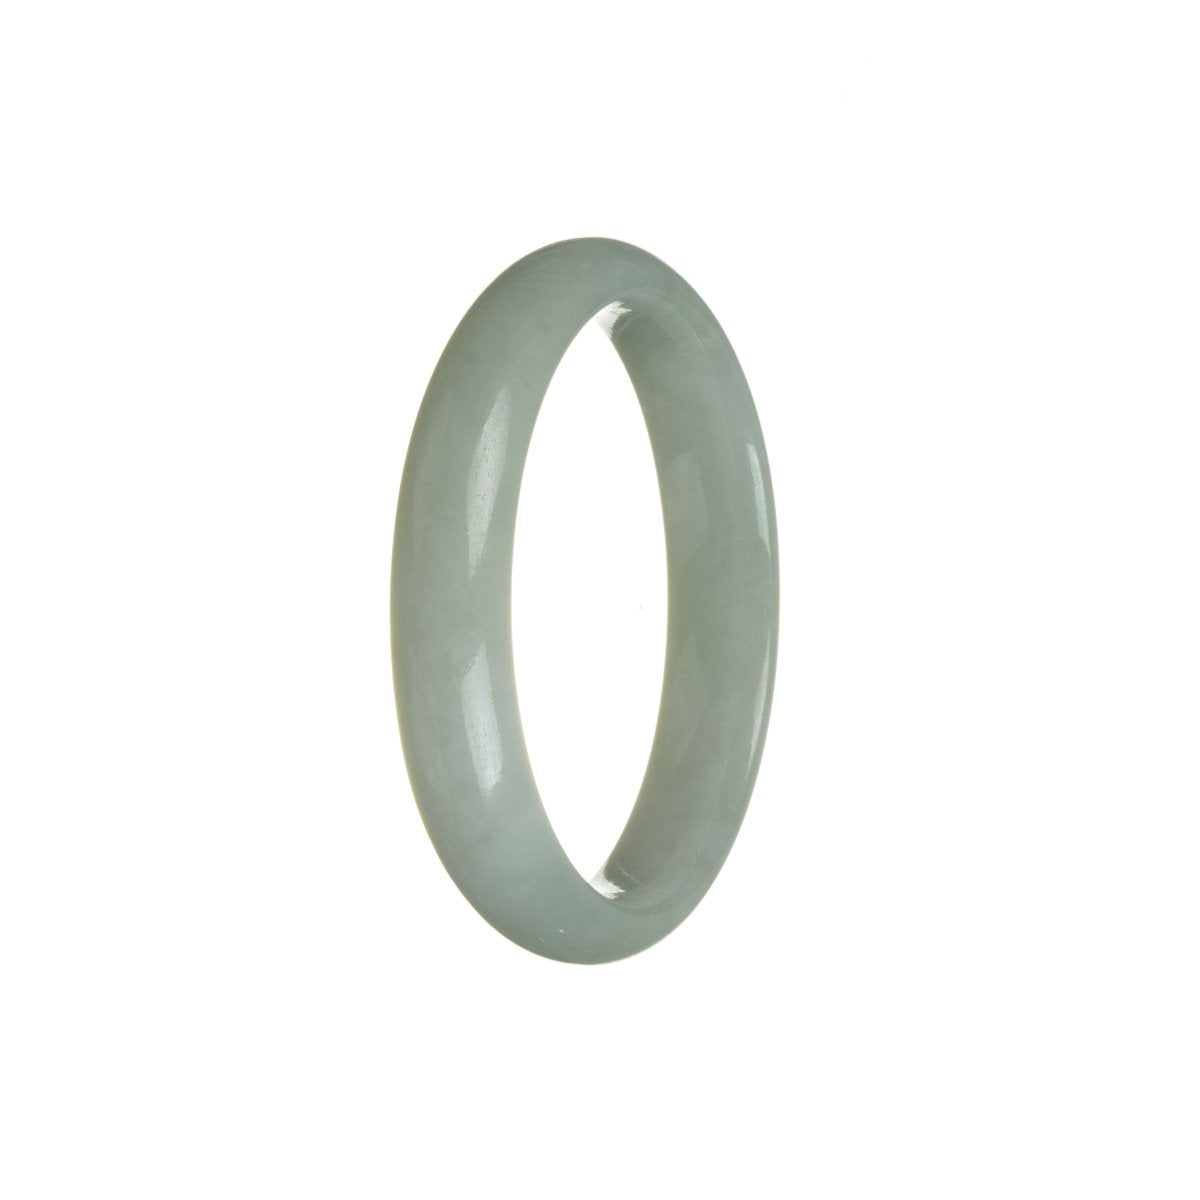 A half-moon shaped white and pale green jade bangle bracelet with a traditional design.